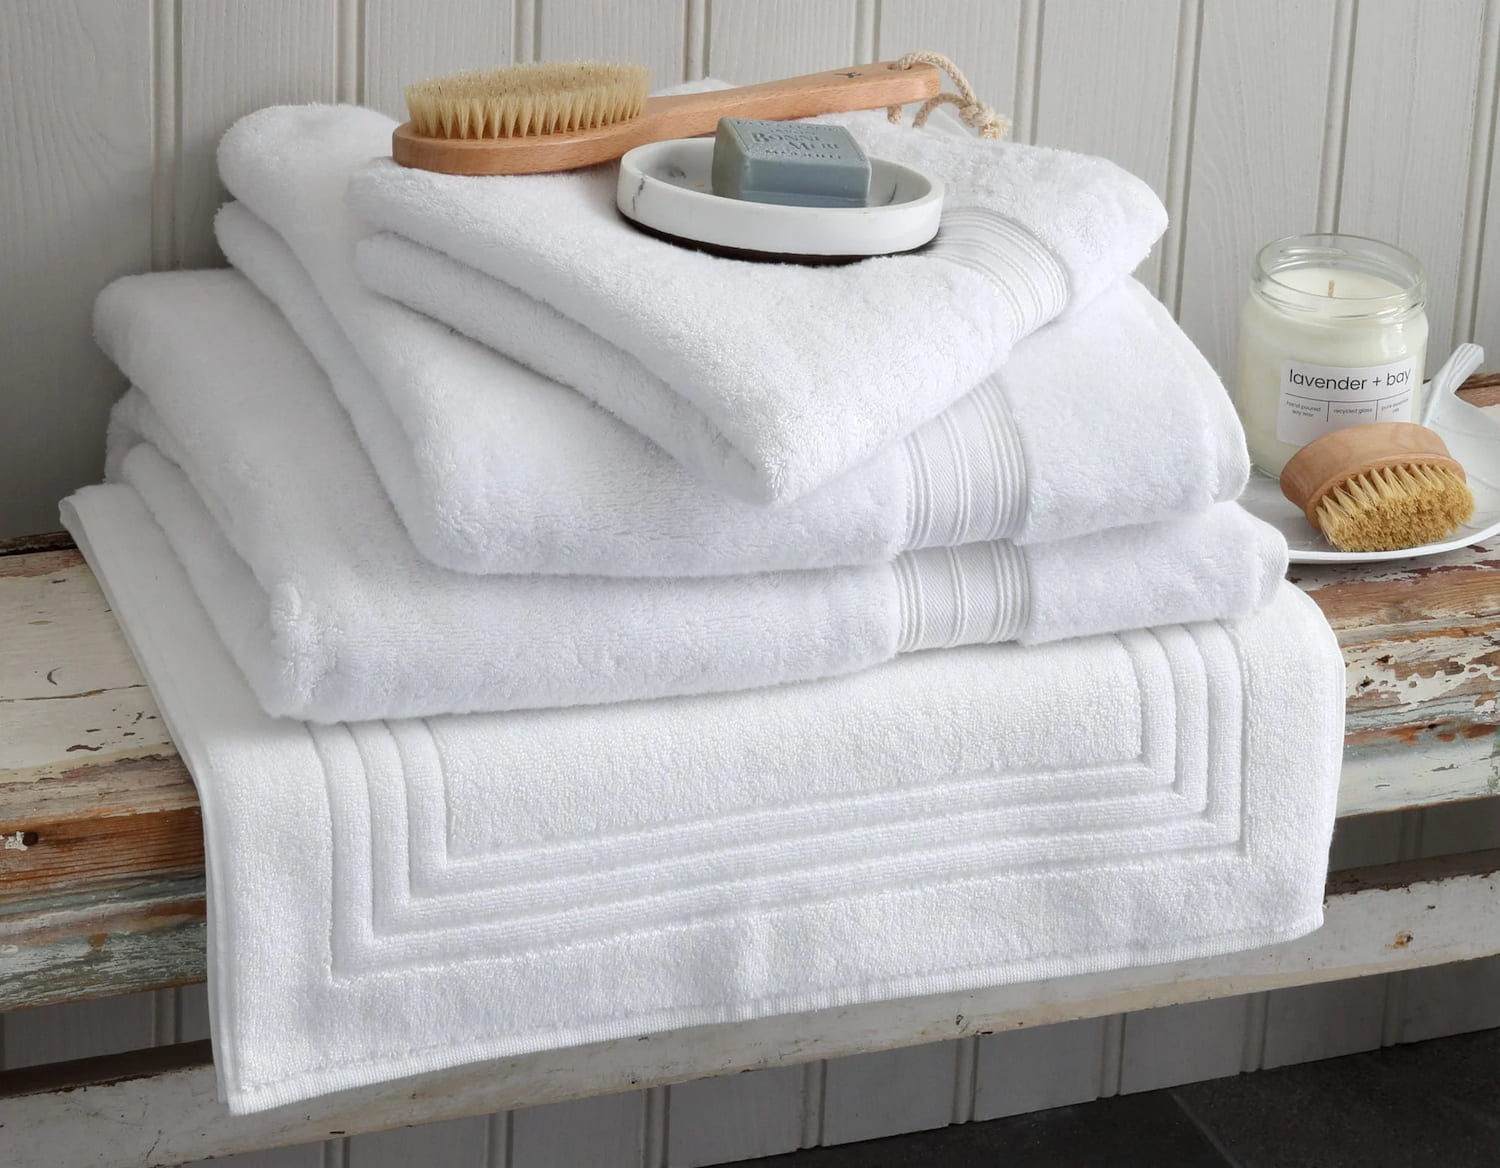 Bundle of white bath towels on rustic bench with scrubbing brush and scooms candle